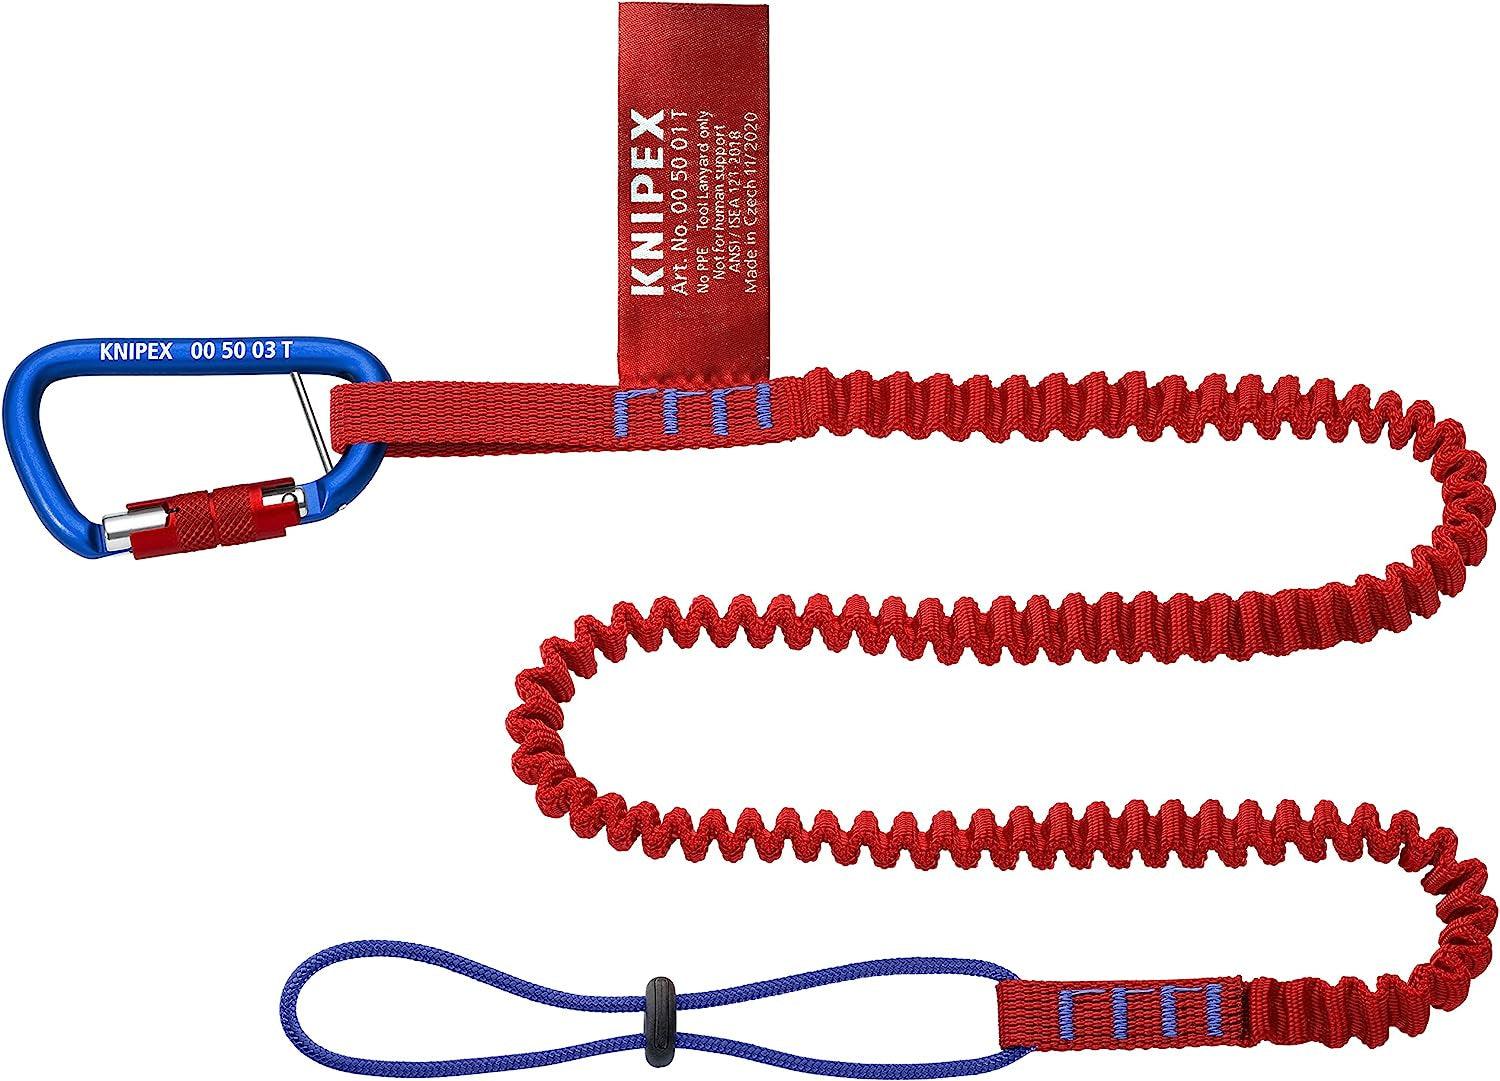 38" Tool Tethering Lanyard with Captive Eye Carabiner - First Choice Electric